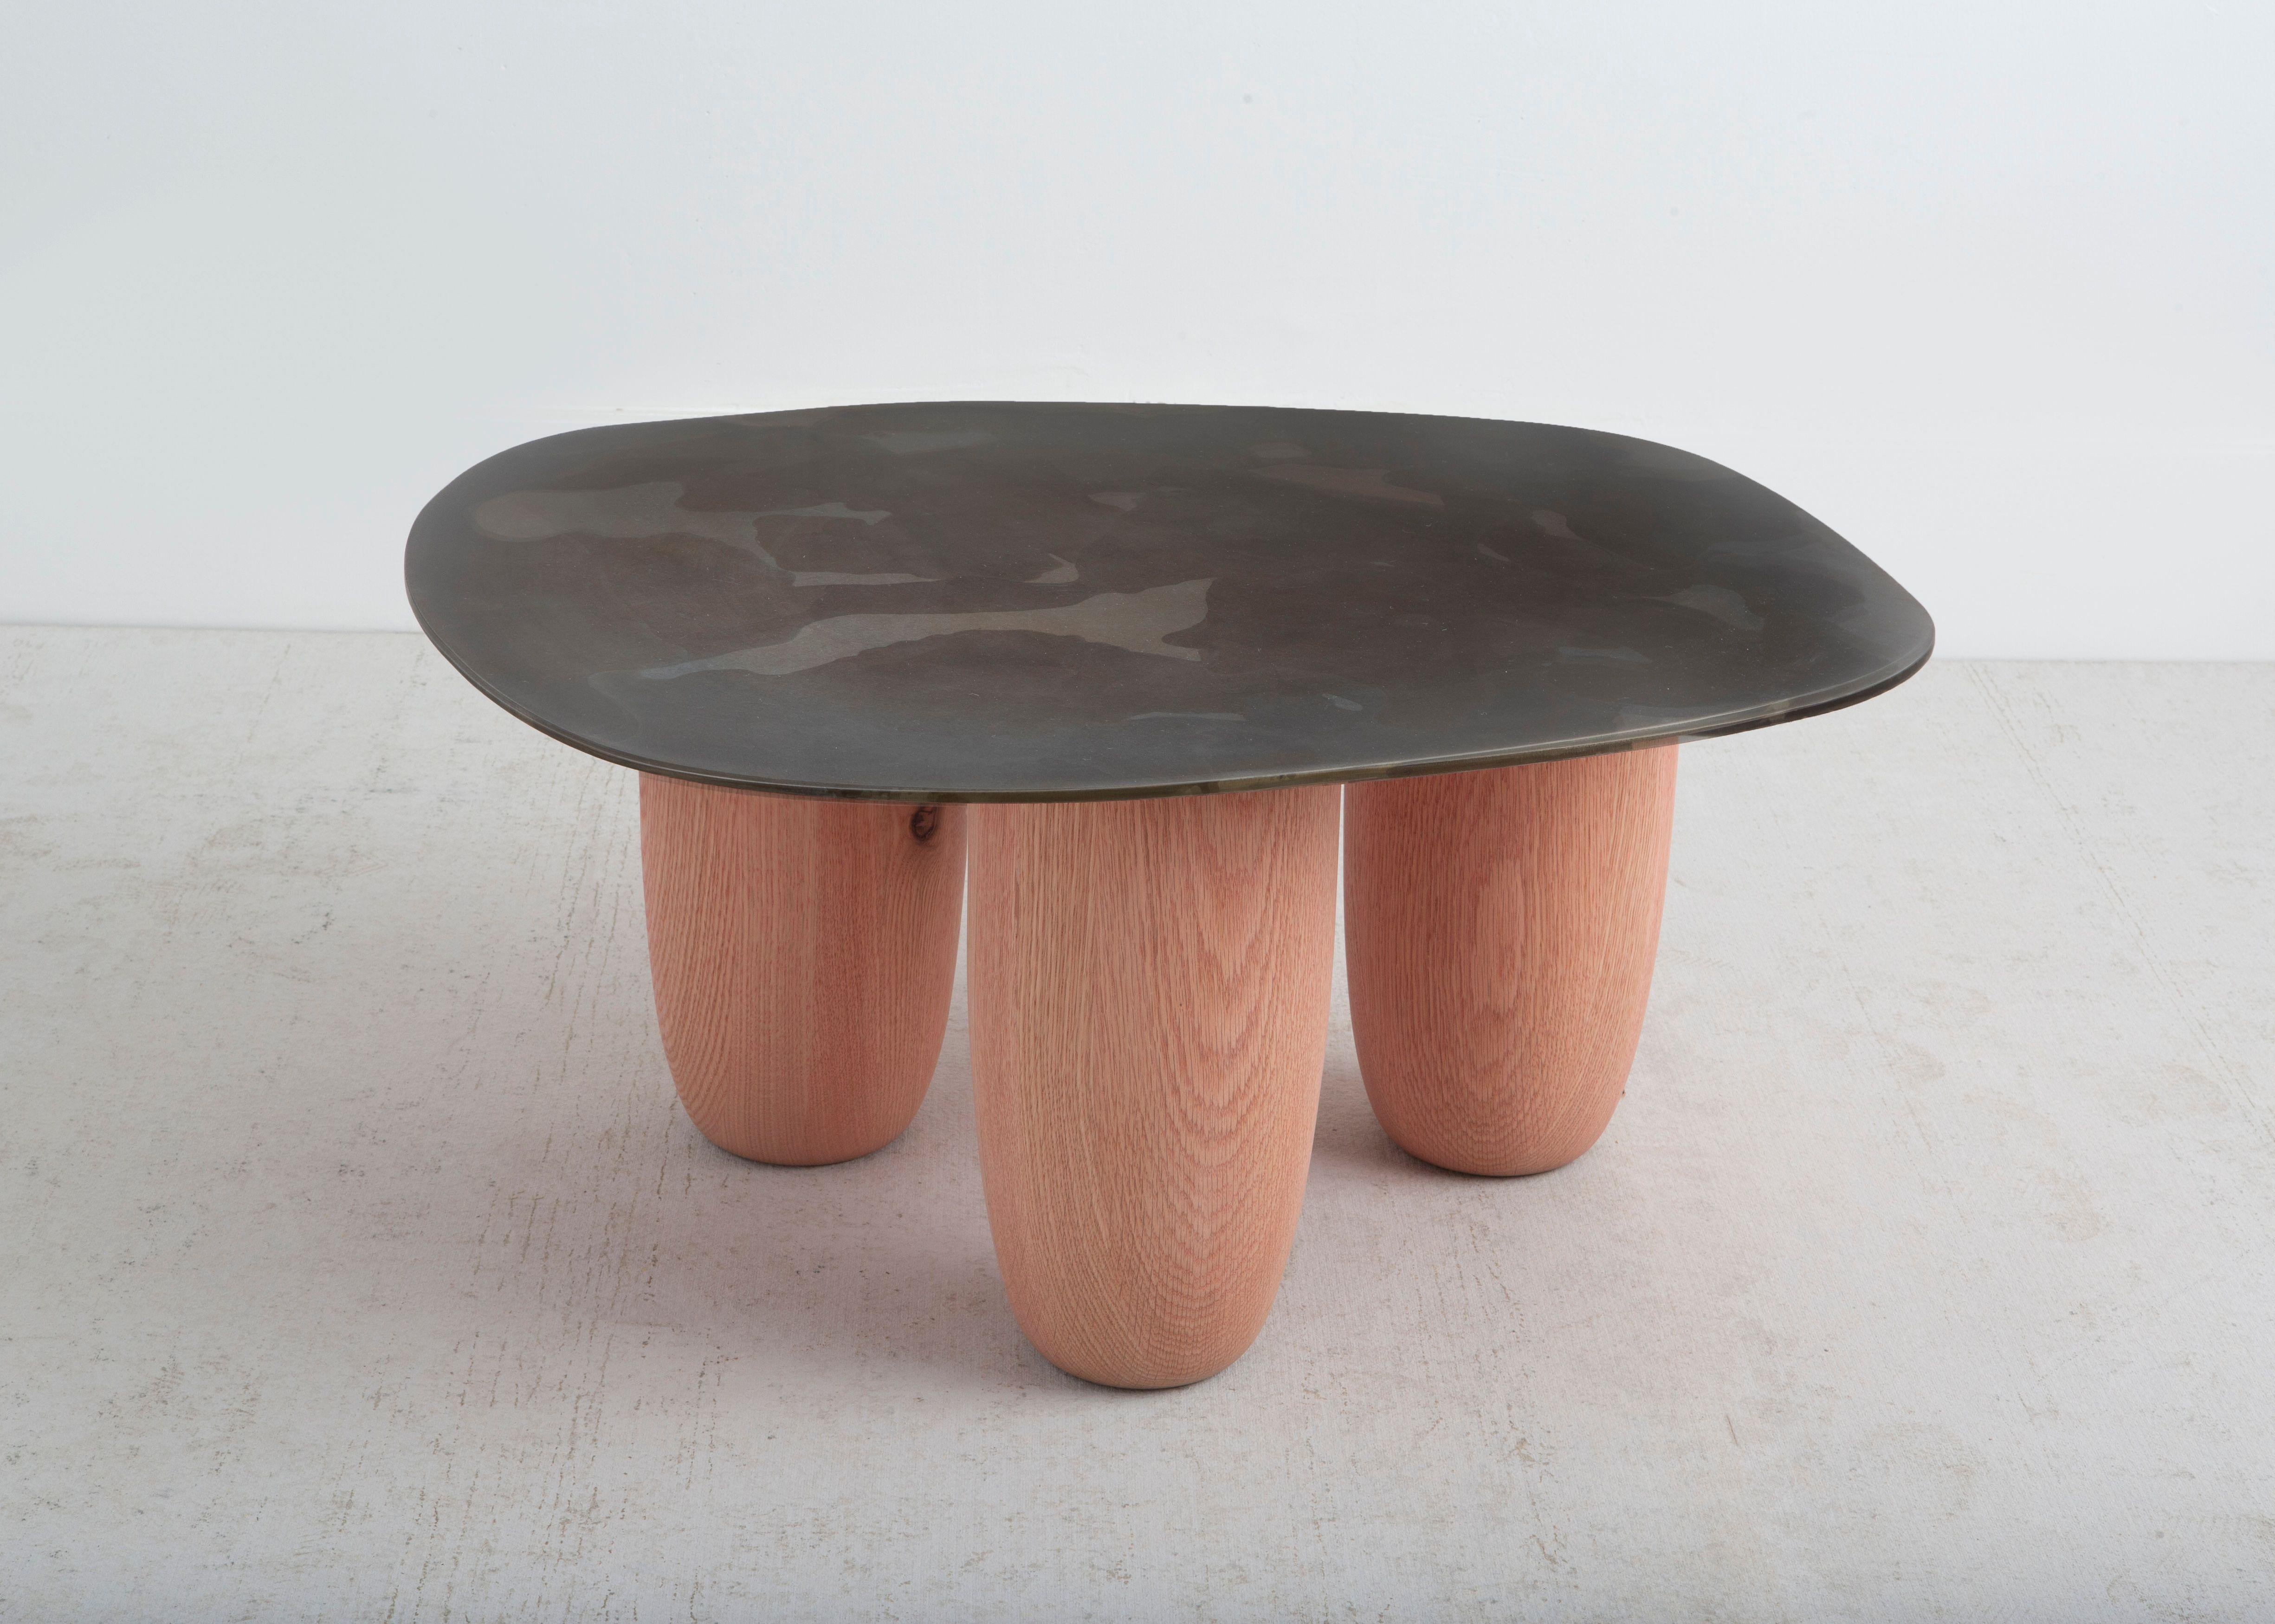 American Contemporary Patinated Steel and Solid Oak Low Tables by Vivian Carbonell